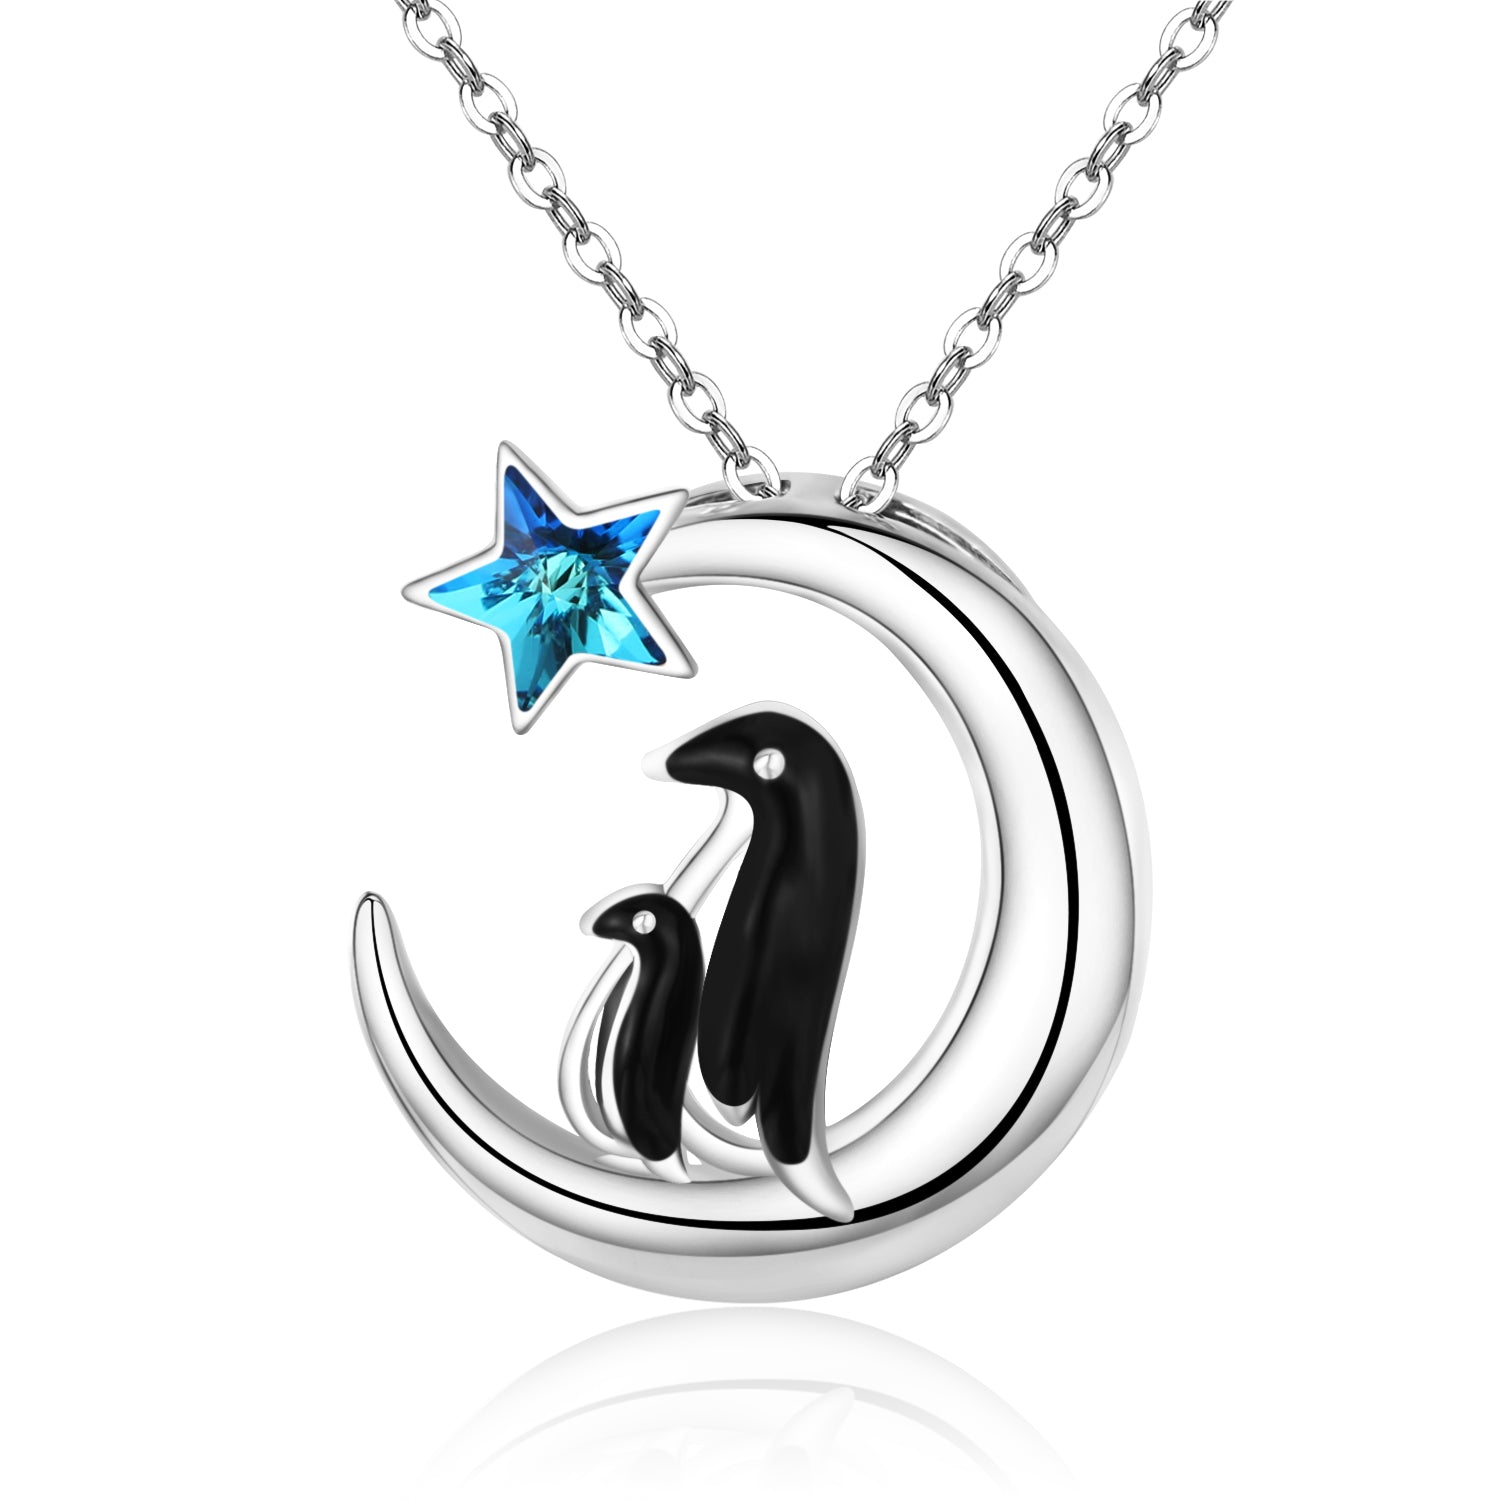 925 Sterling Silver Family Mother Child Heart Pendant Cute Animal Penguin Jewelry